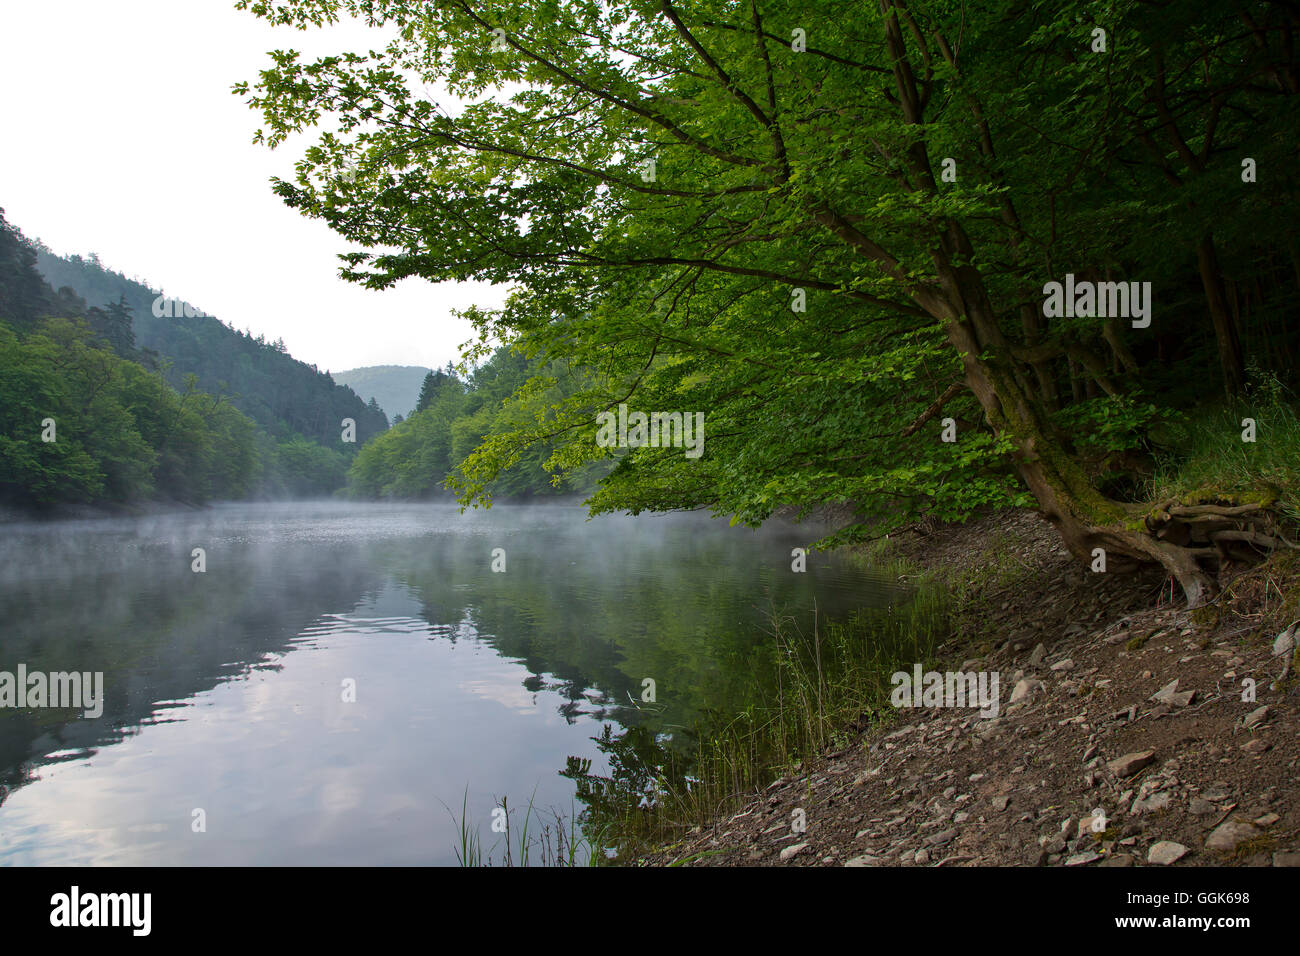 Mirrored view of Banfe Bucht at Lake Edersee at dawn with mist and forest in Kellerwald-Edersee National Park, Lake Edersee, Hes Stock Photo